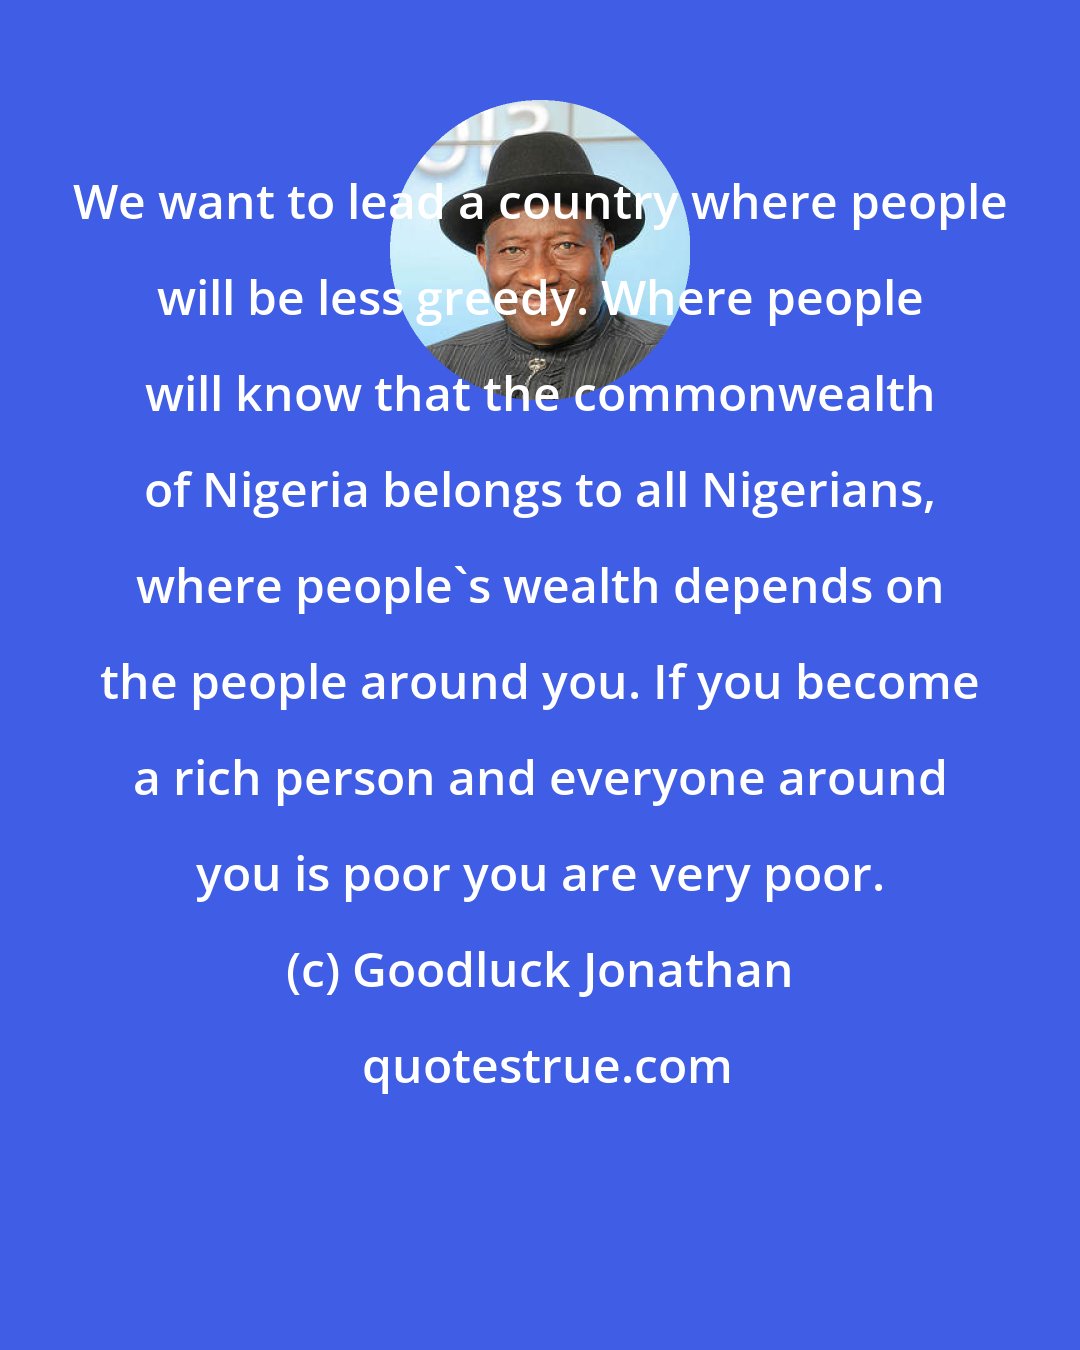 Goodluck Jonathan: We want to lead a country where people will be less greedy. Where people will know that the commonwealth of Nigeria belongs to all Nigerians, where people's wealth depends on the people around you. If you become a rich person and everyone around you is poor you are very poor.